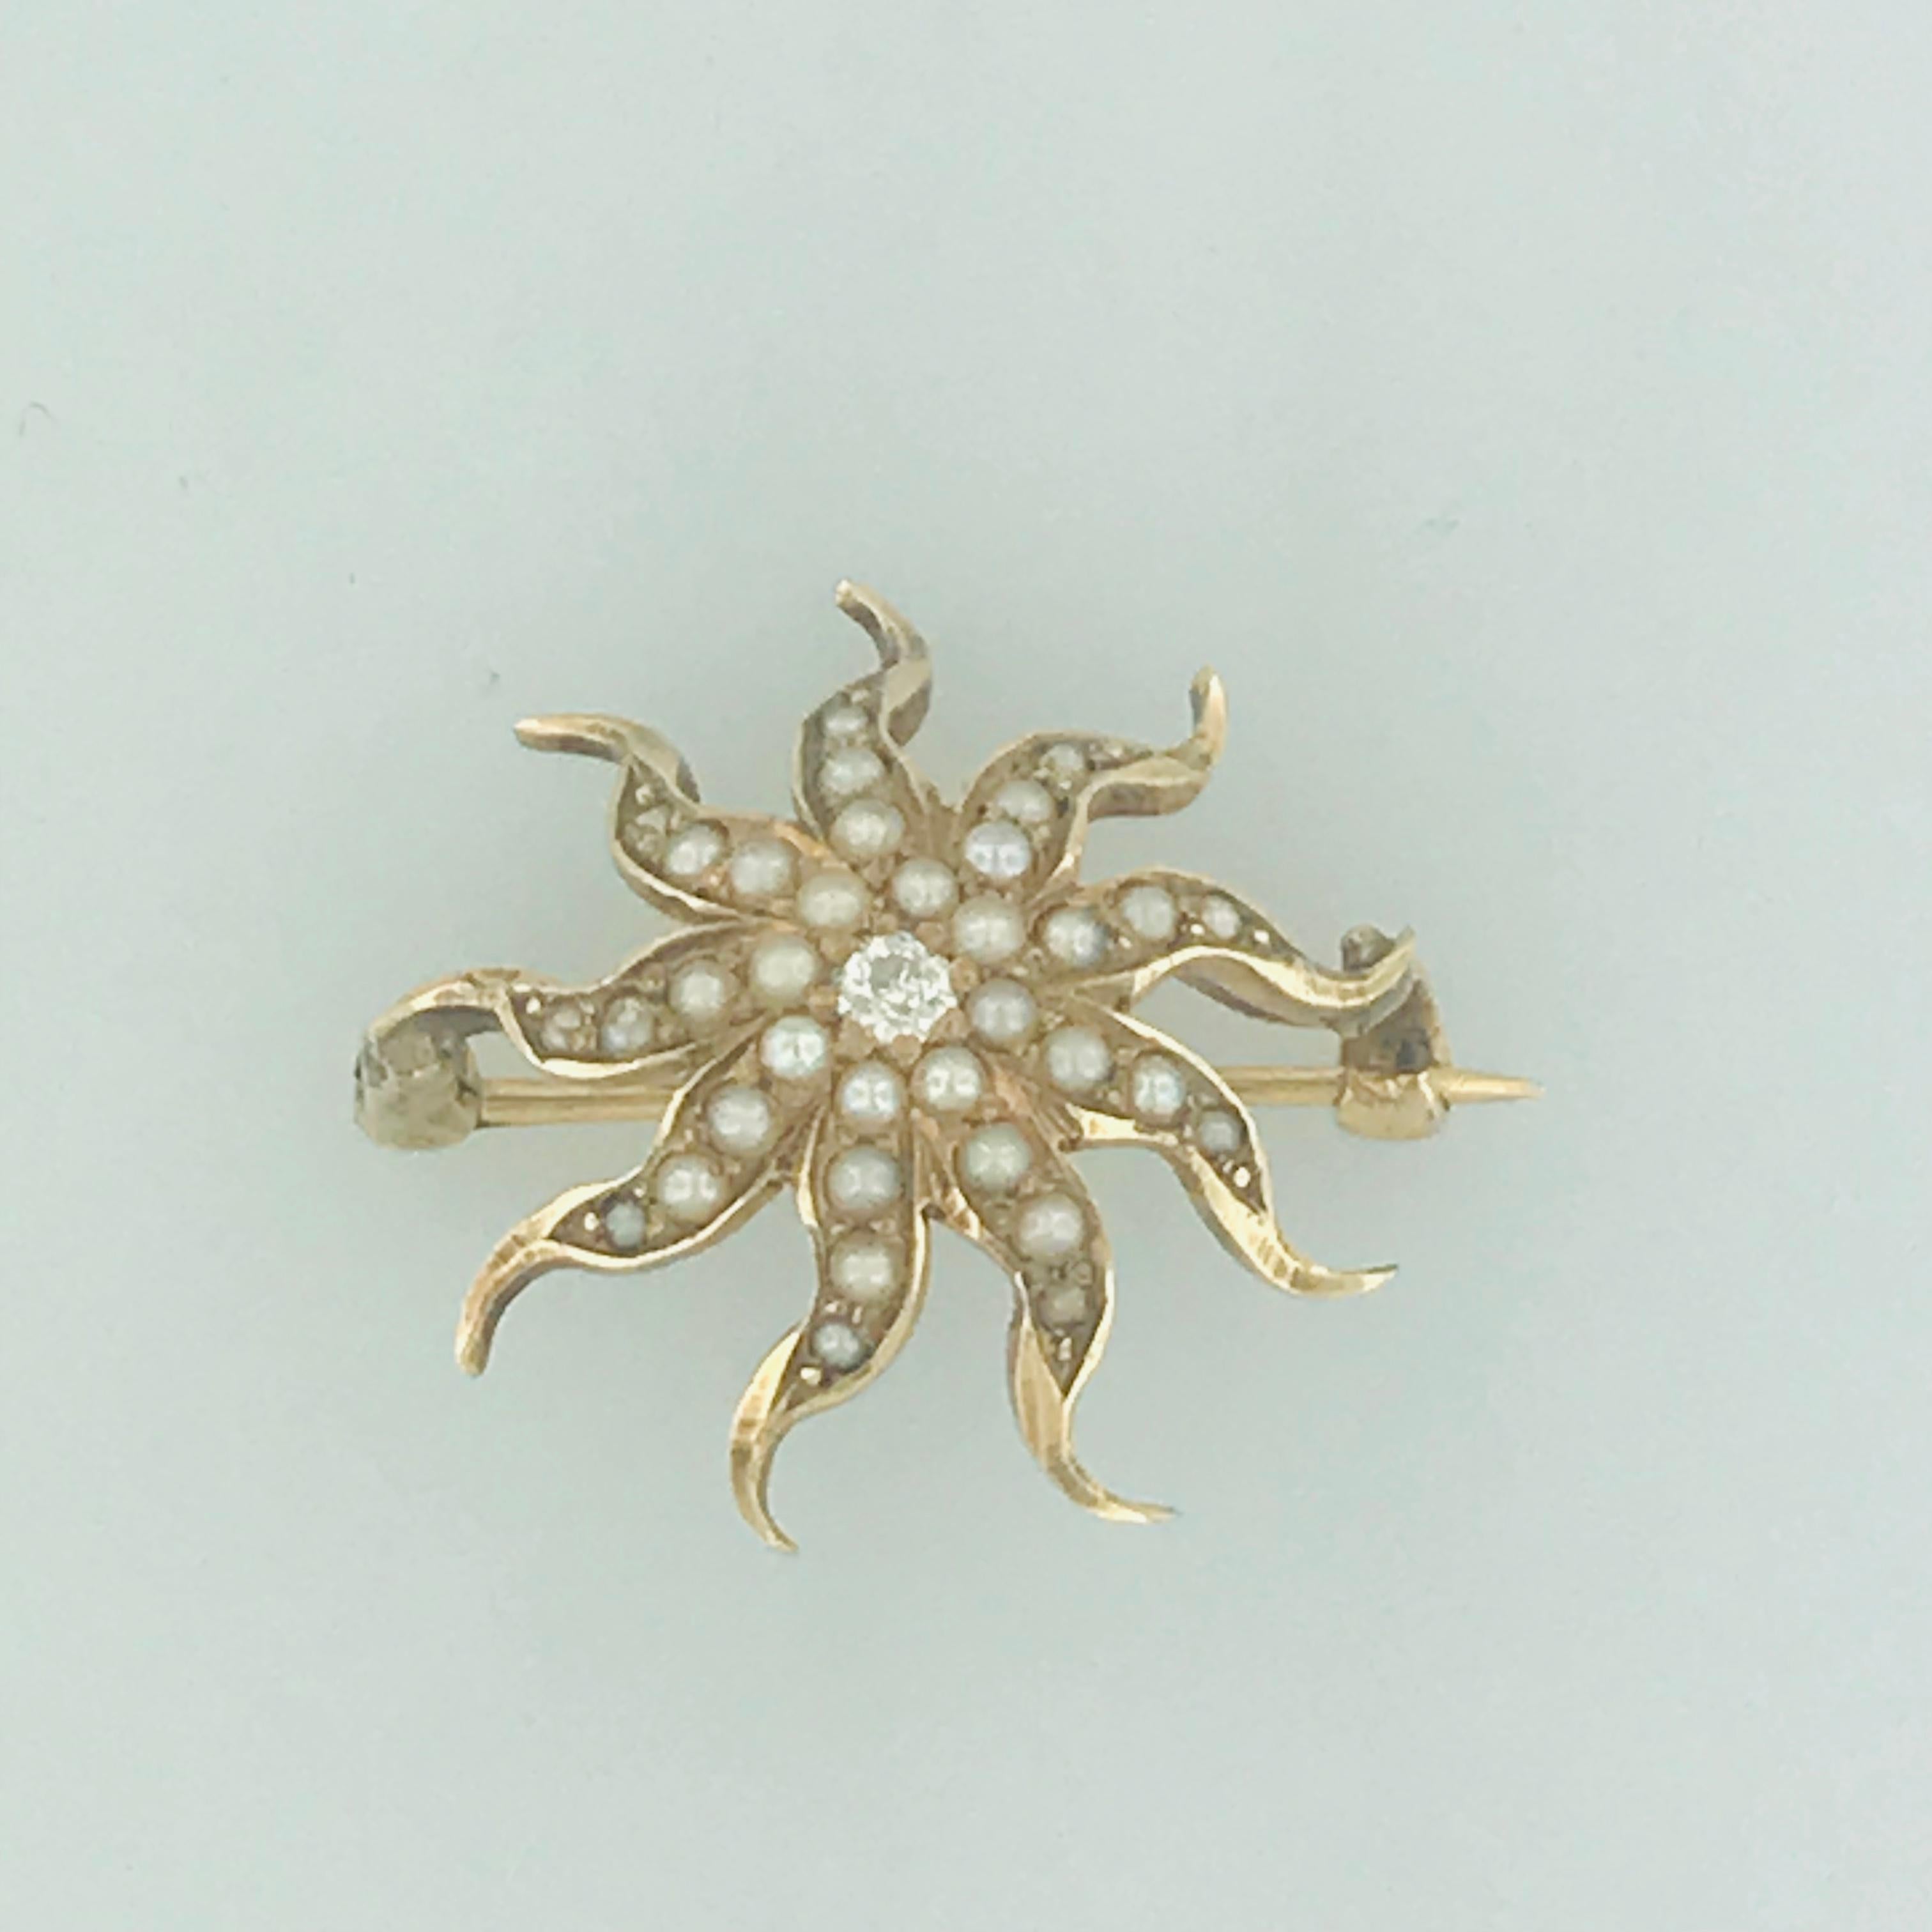 Round Cut Authentic Victorian Antique Cultured Seed Pearl Starburst Brooch/Pin